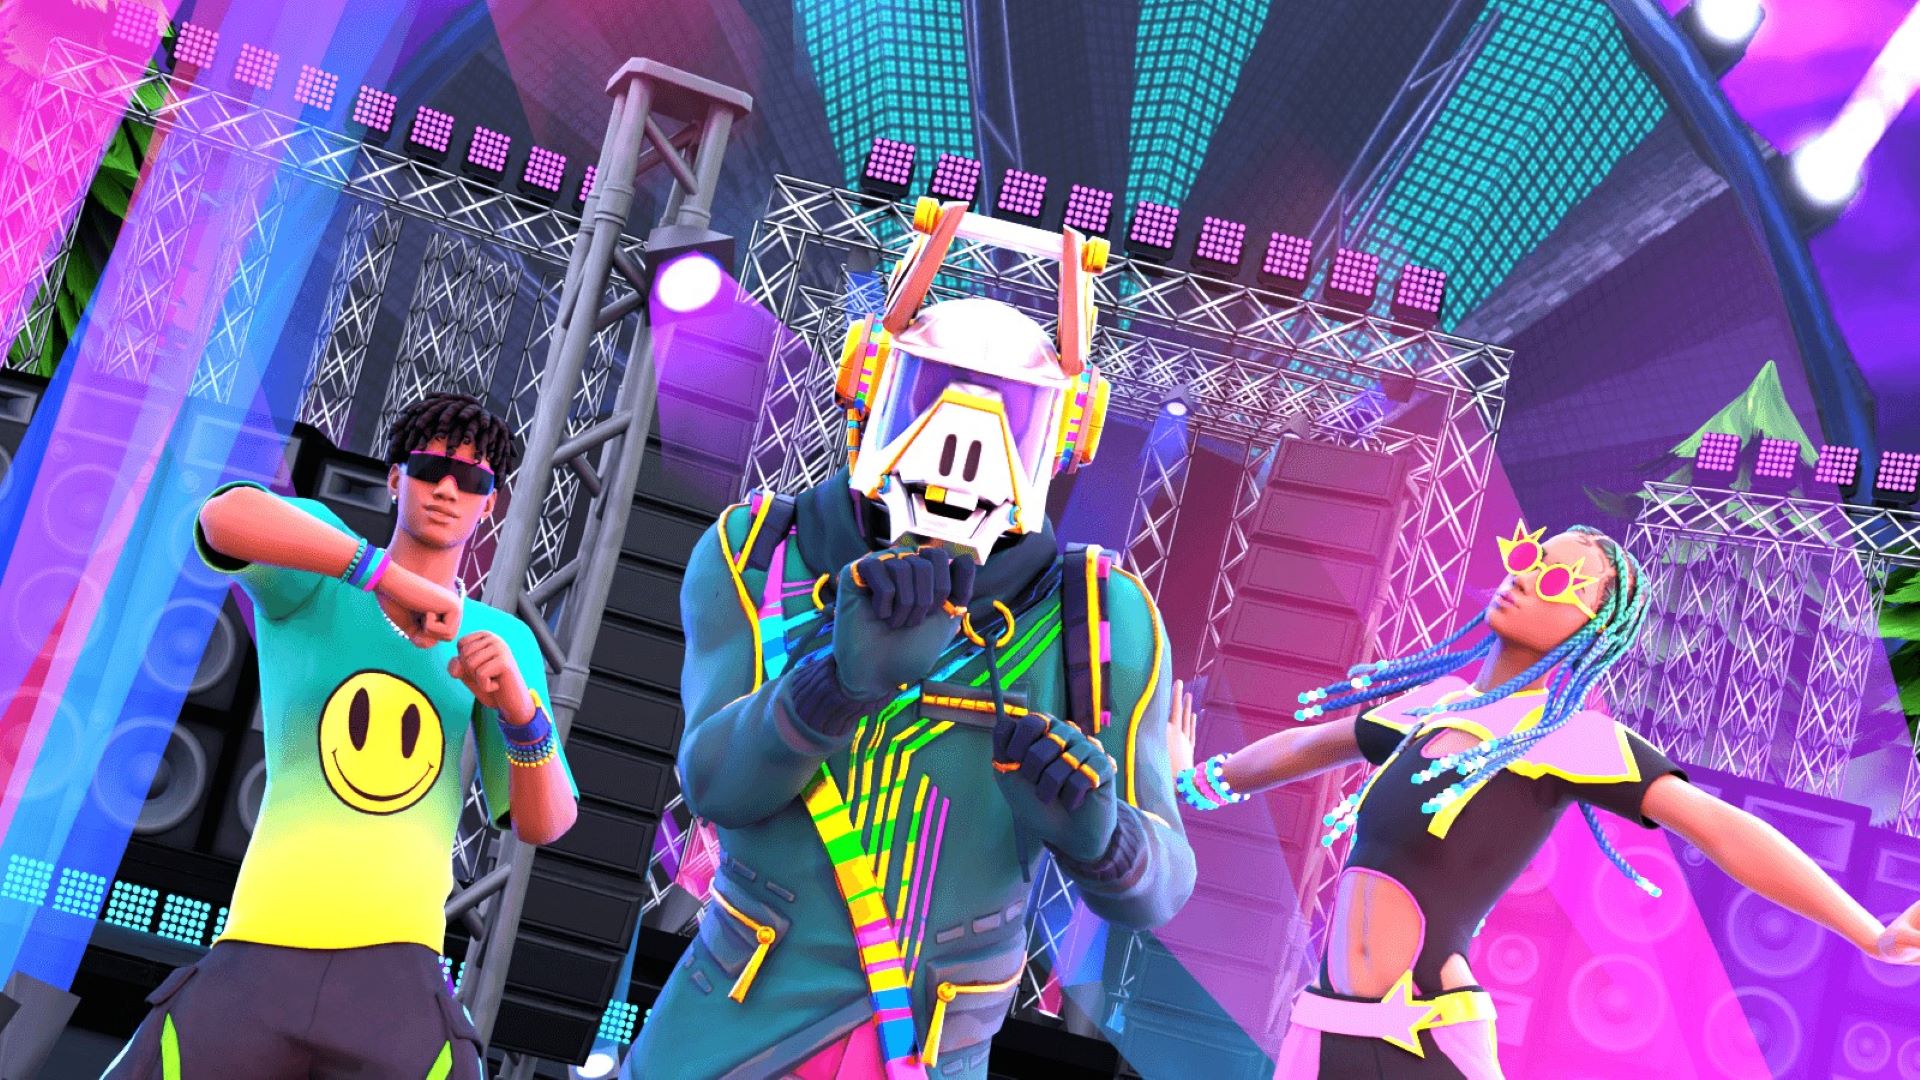 Fortnite custom music maps are the perfect rave party